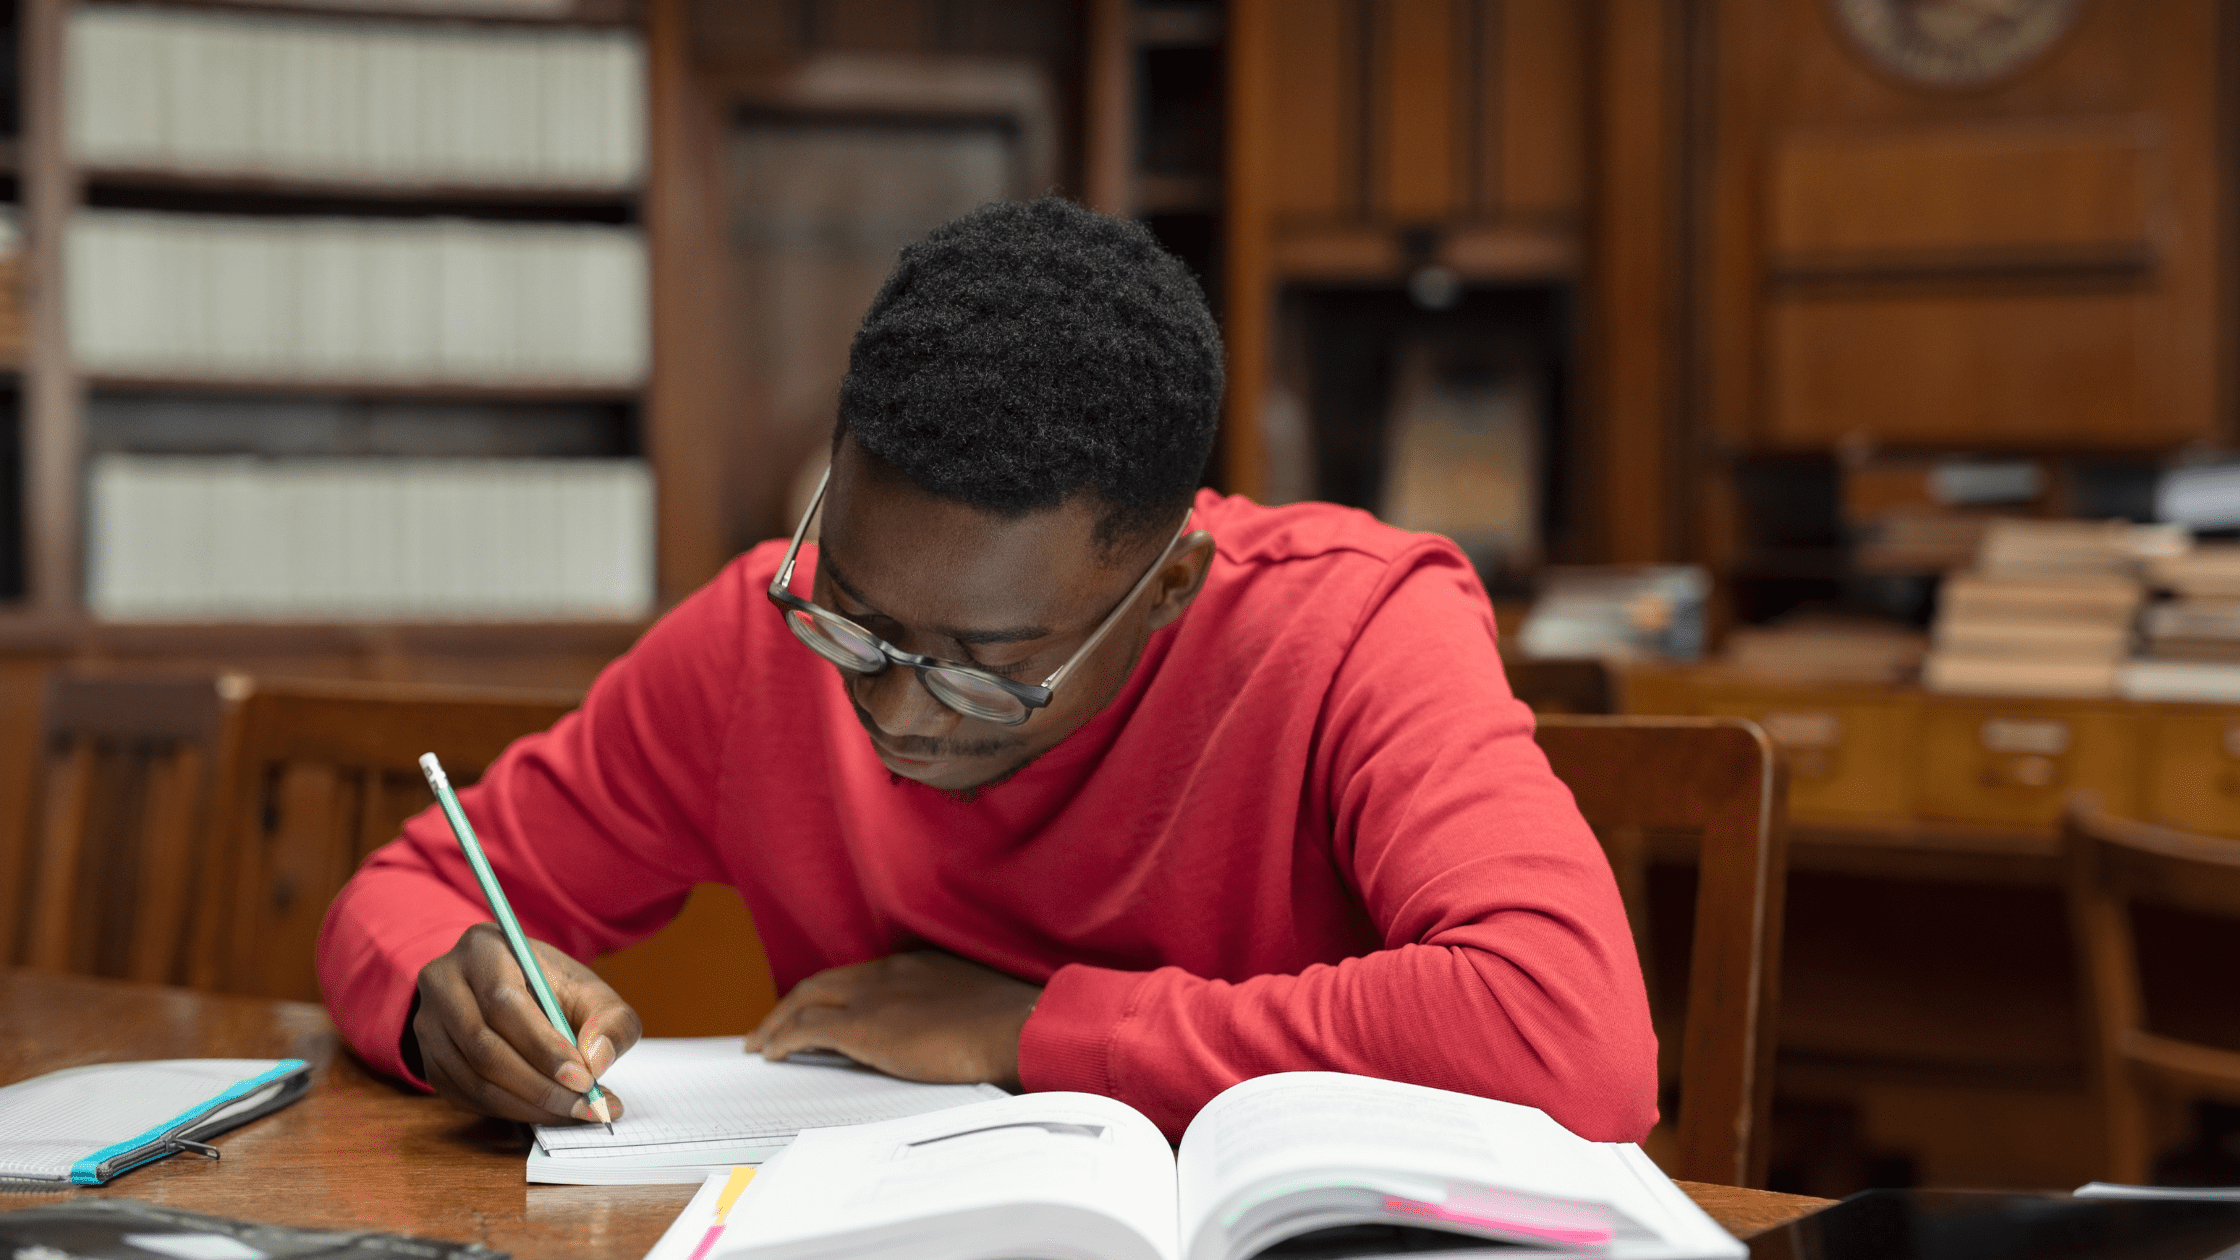 A student studying for the USMLE Step 2 in a library in front of medical textbooks.